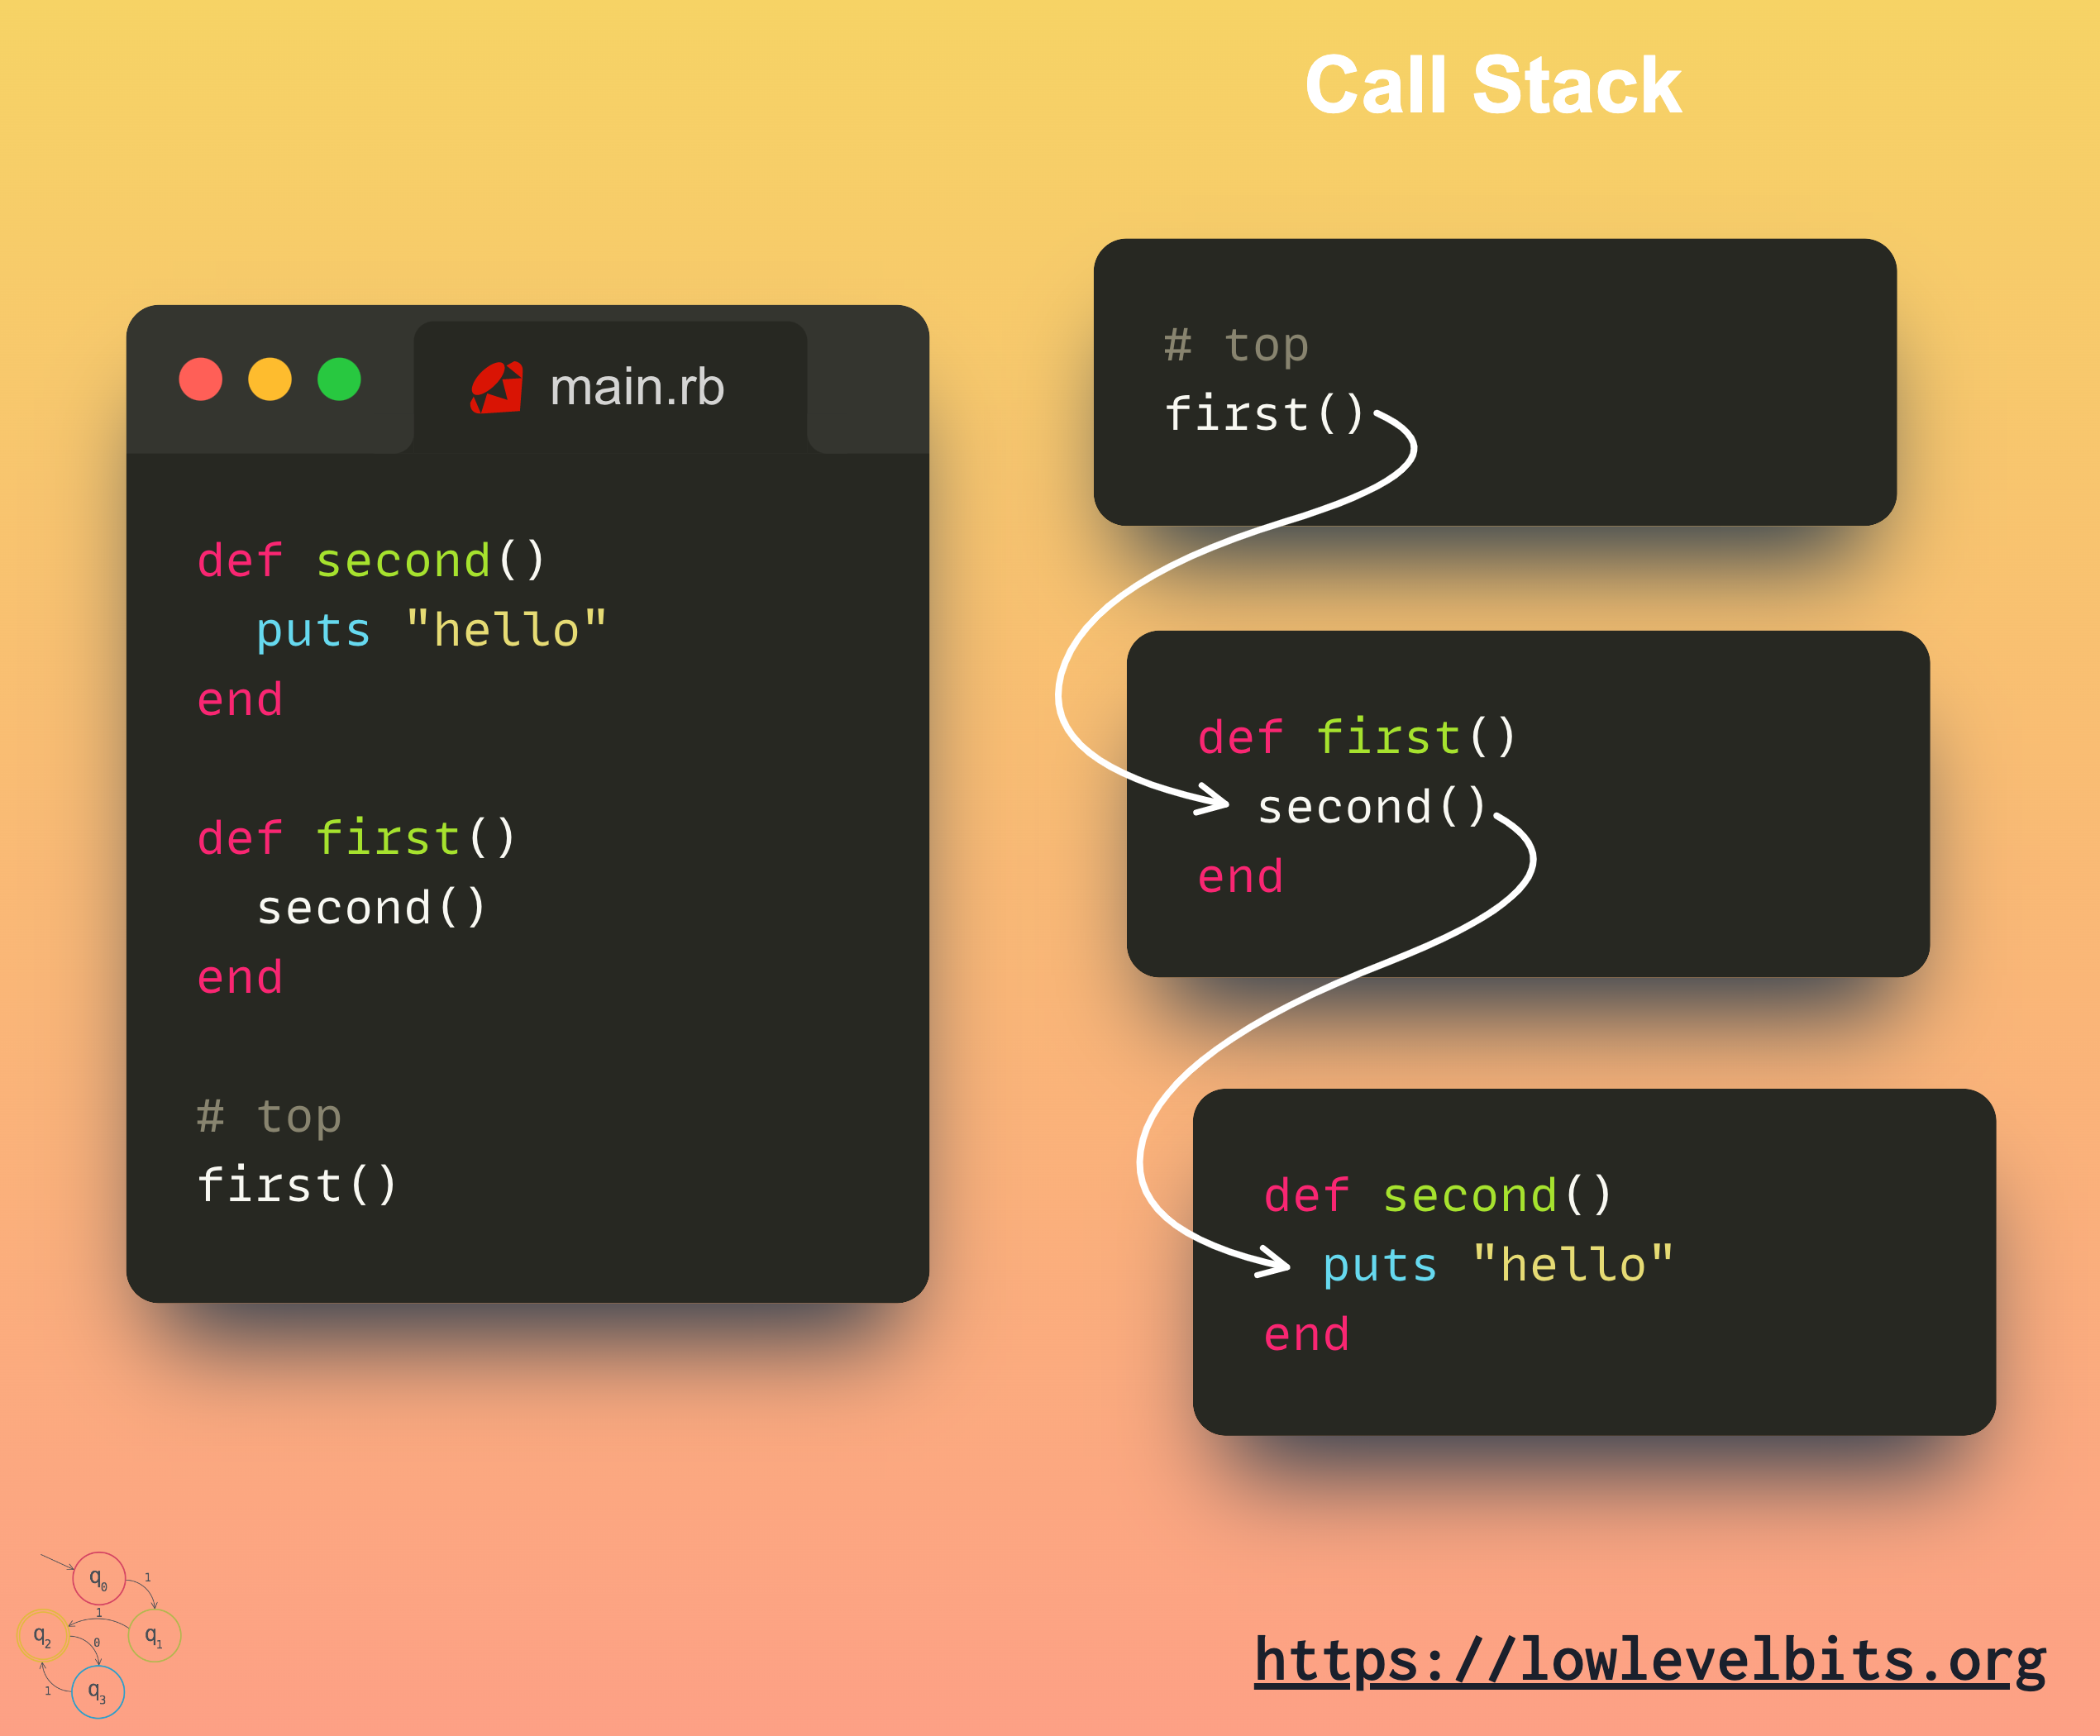 Call Stack